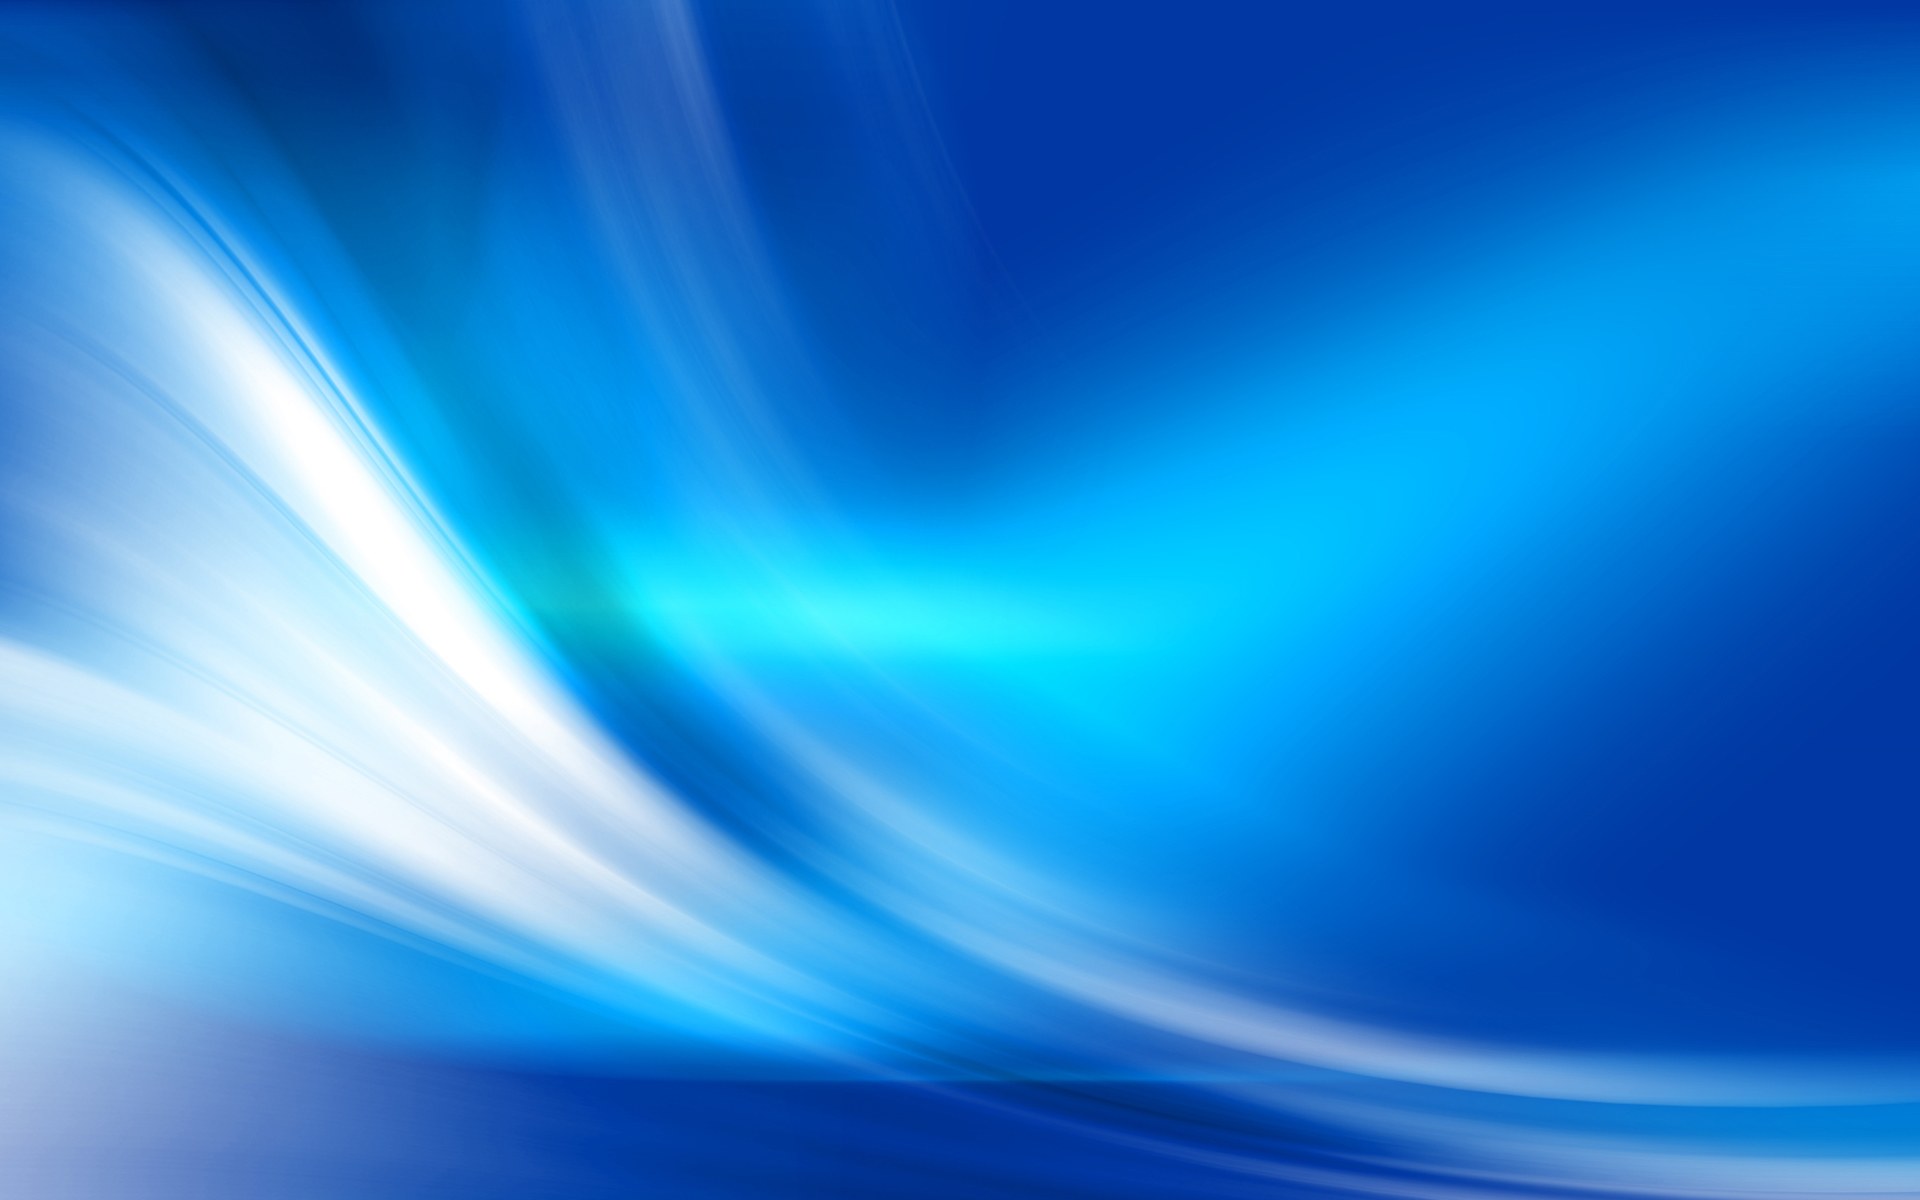 Abstract Blue 2615 Hd Wallpapers in Abstract   Imagescicom 1920x1200